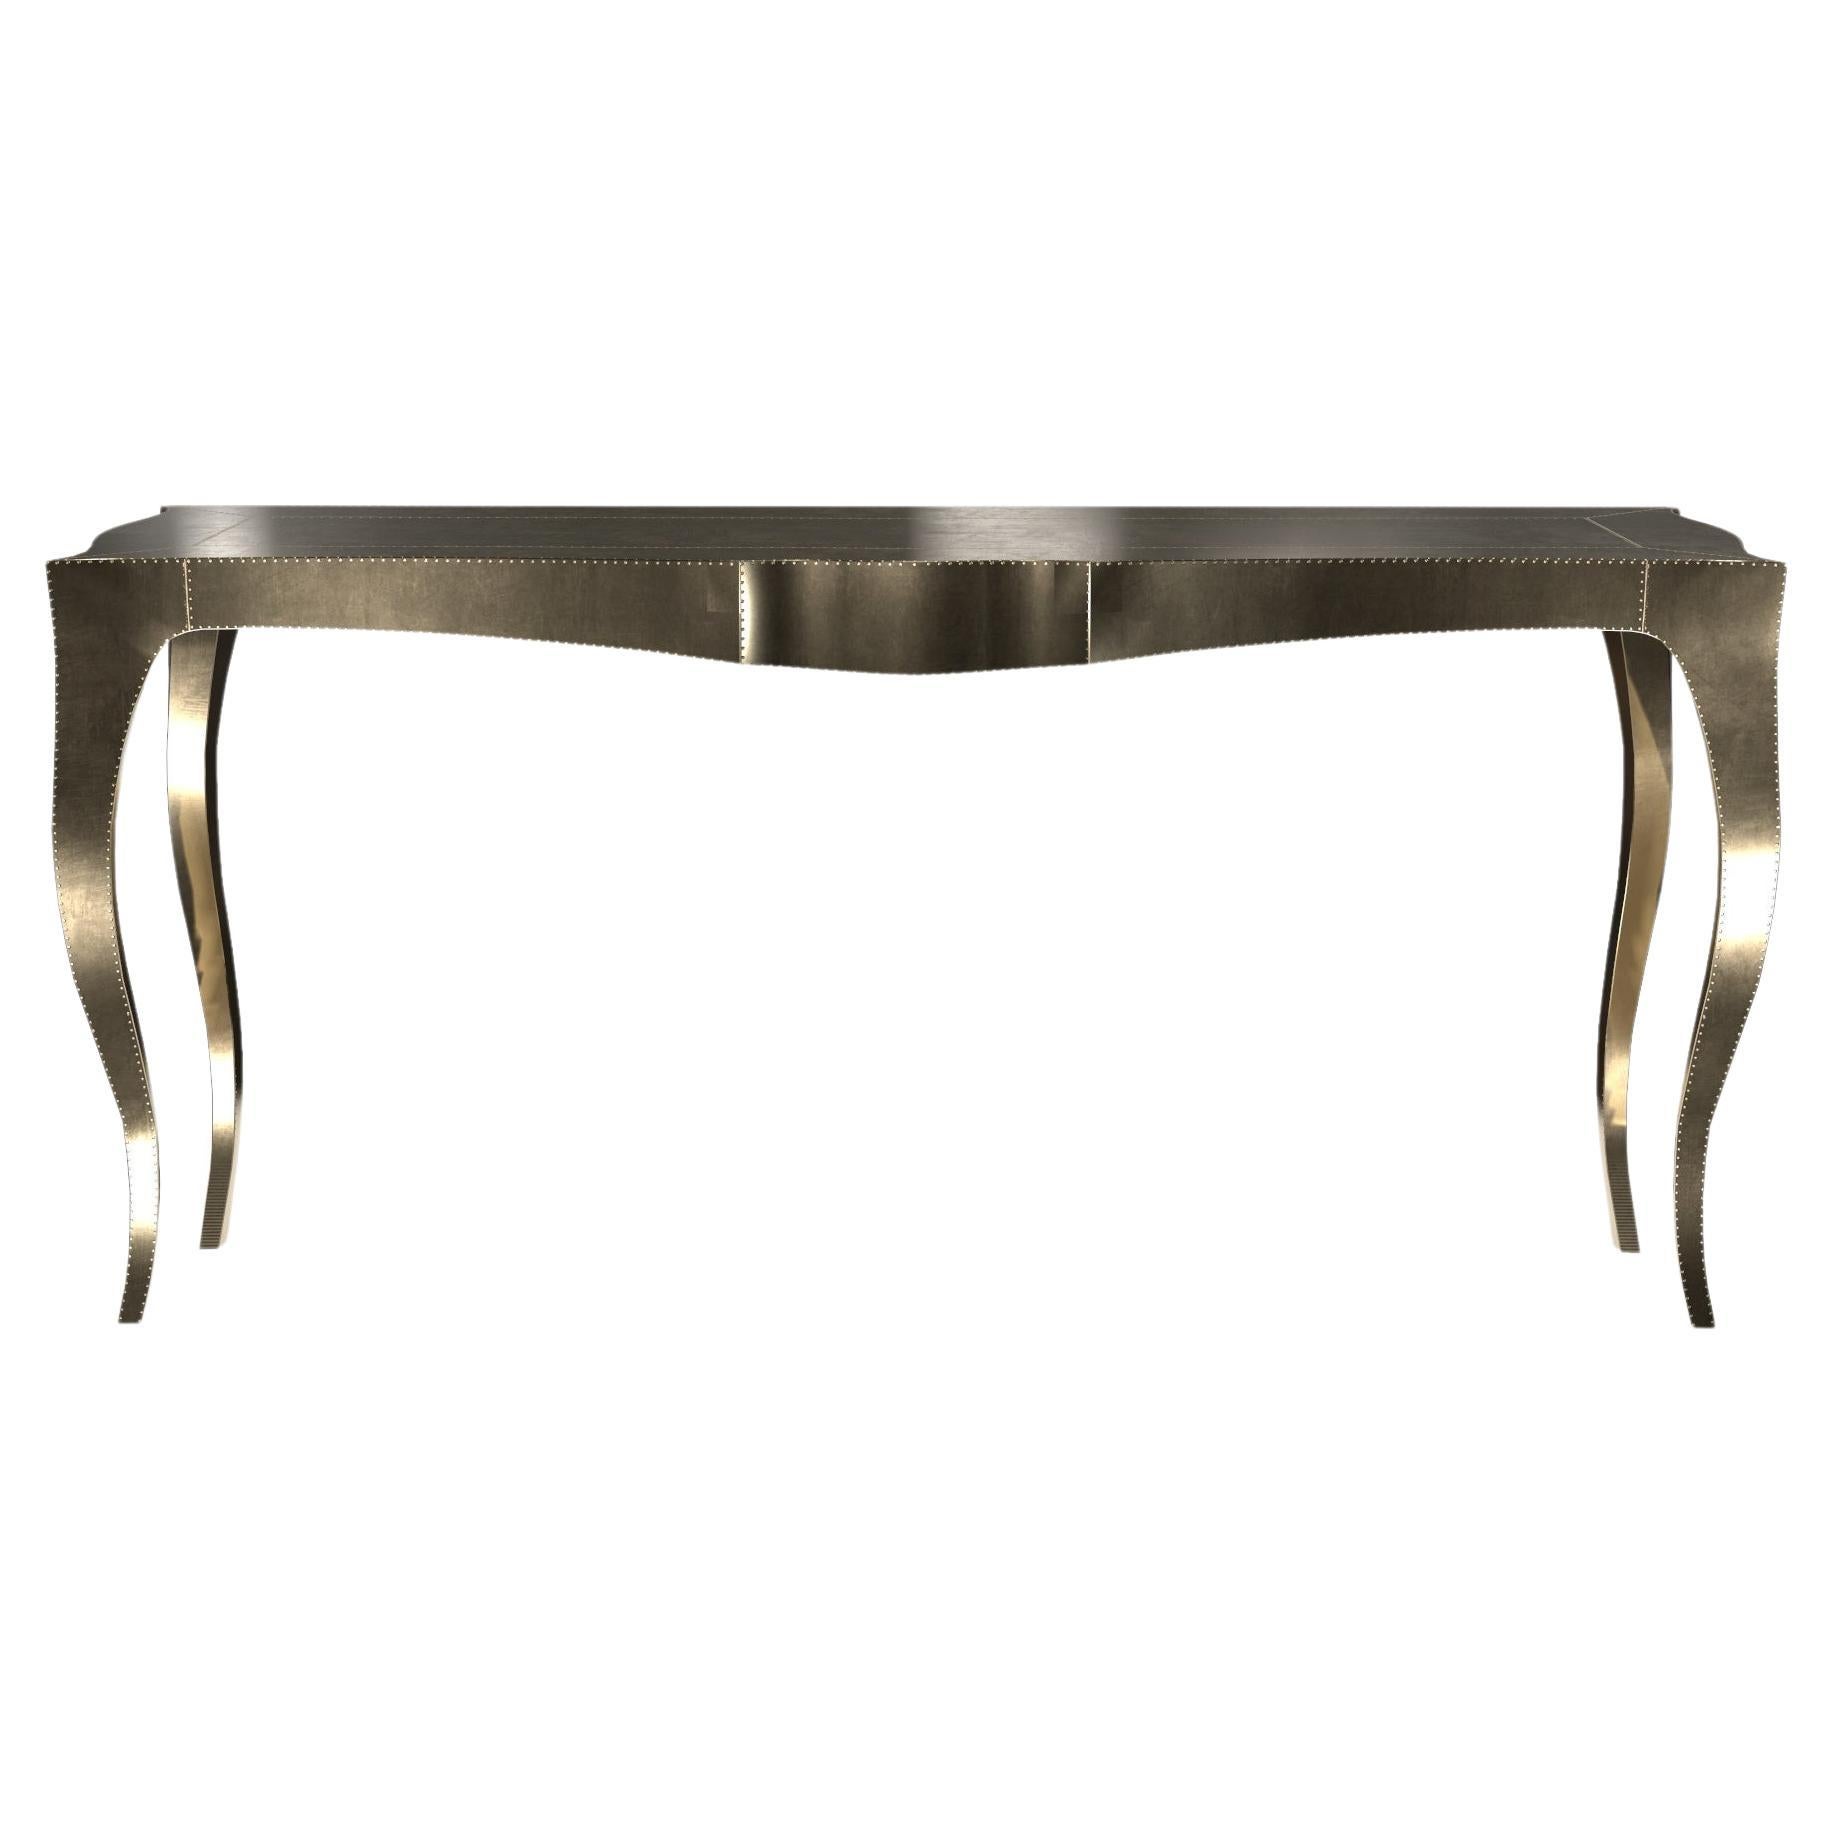 Louise Console Art Deco Conference Tables Smooth Brass by Paul Mathieu